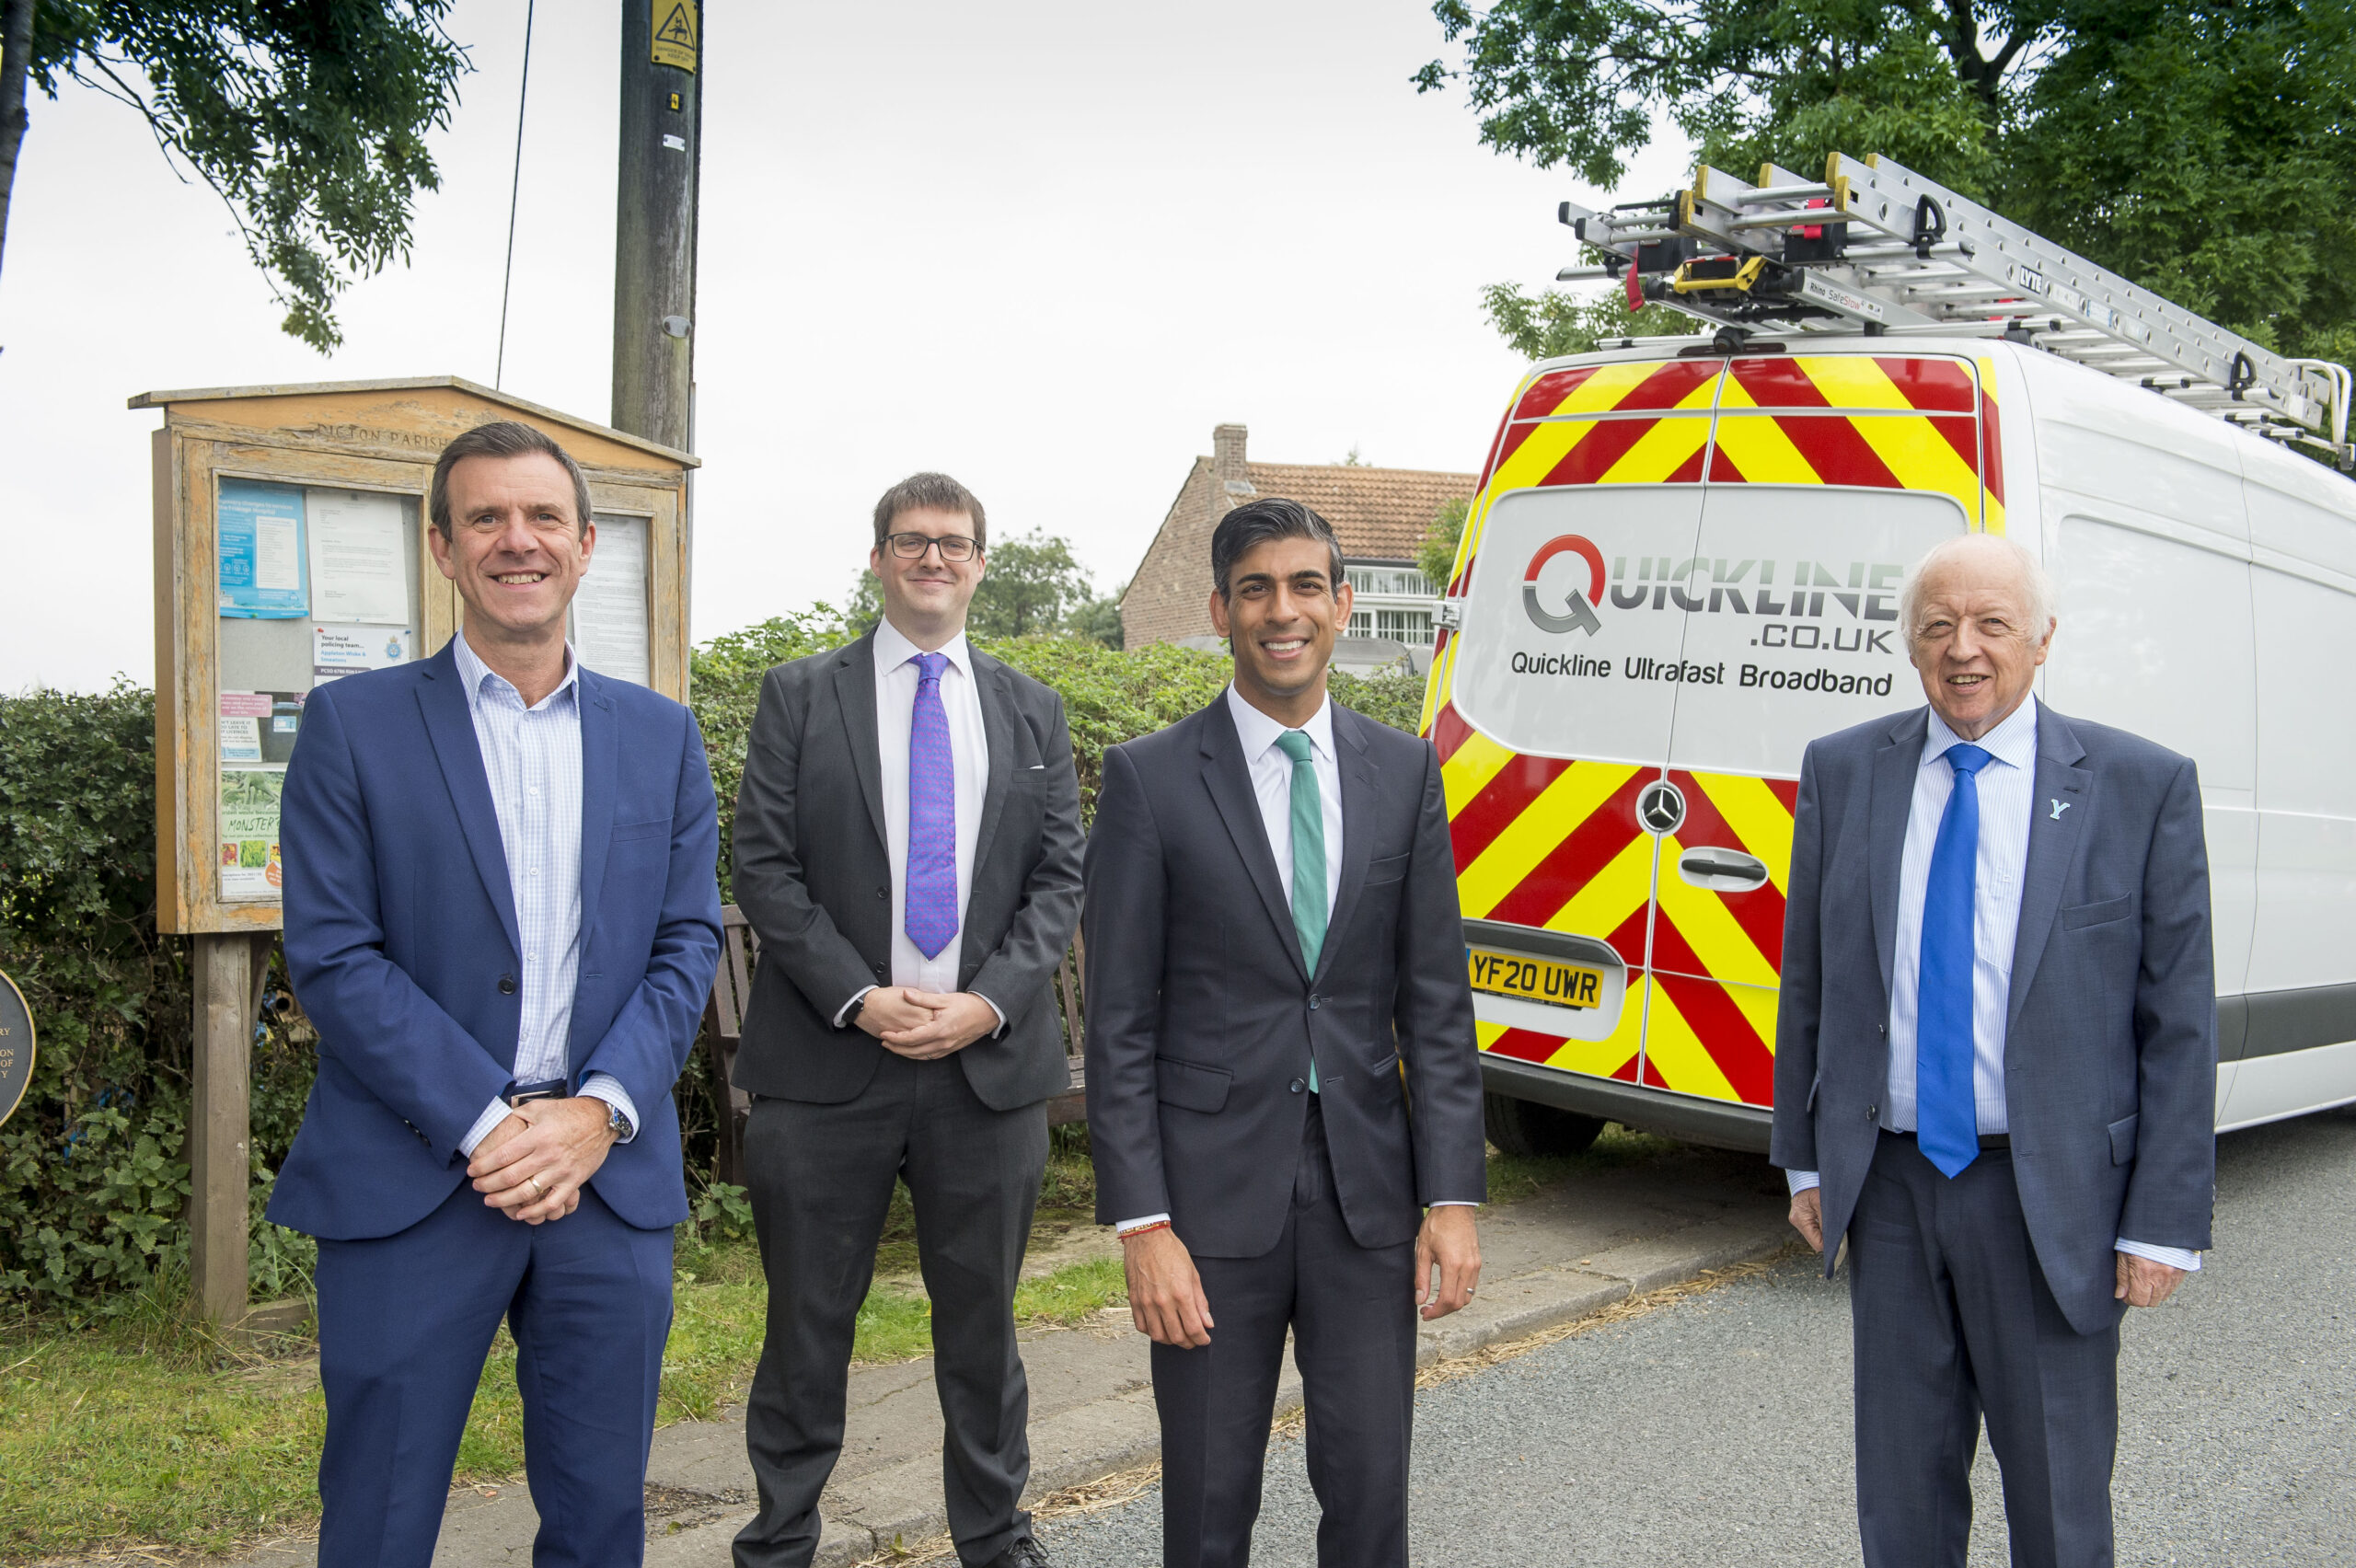 Rishi Sunak, MP for Richmond (Yorks) with Alastair Taylor, CEO or NYnet, Sean Royce, CEO of Quickline Communications and Cllr Carl Les, Leader of North Yorkshire County Council